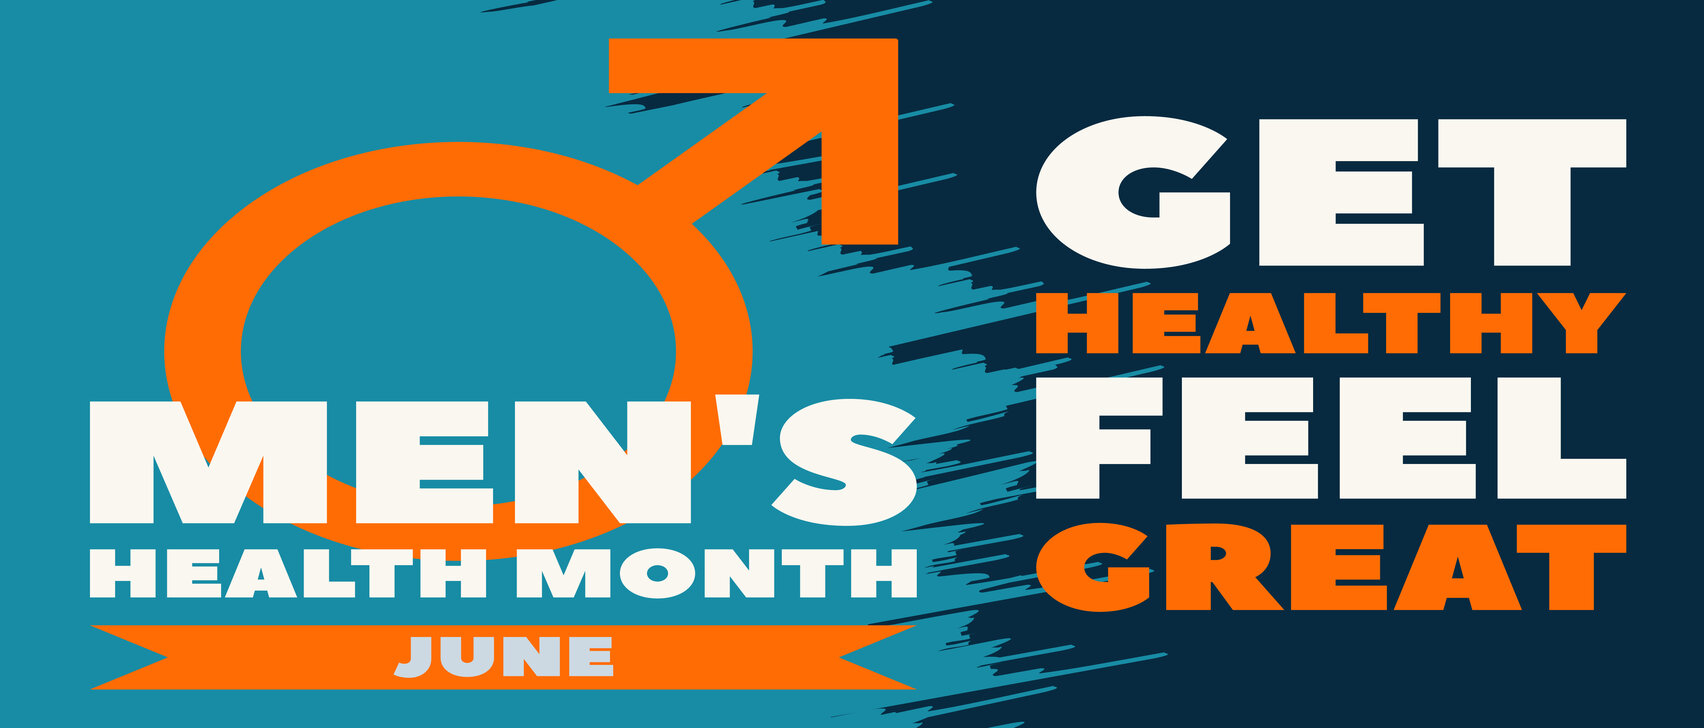 mens health awareness blue and orange with a male sign